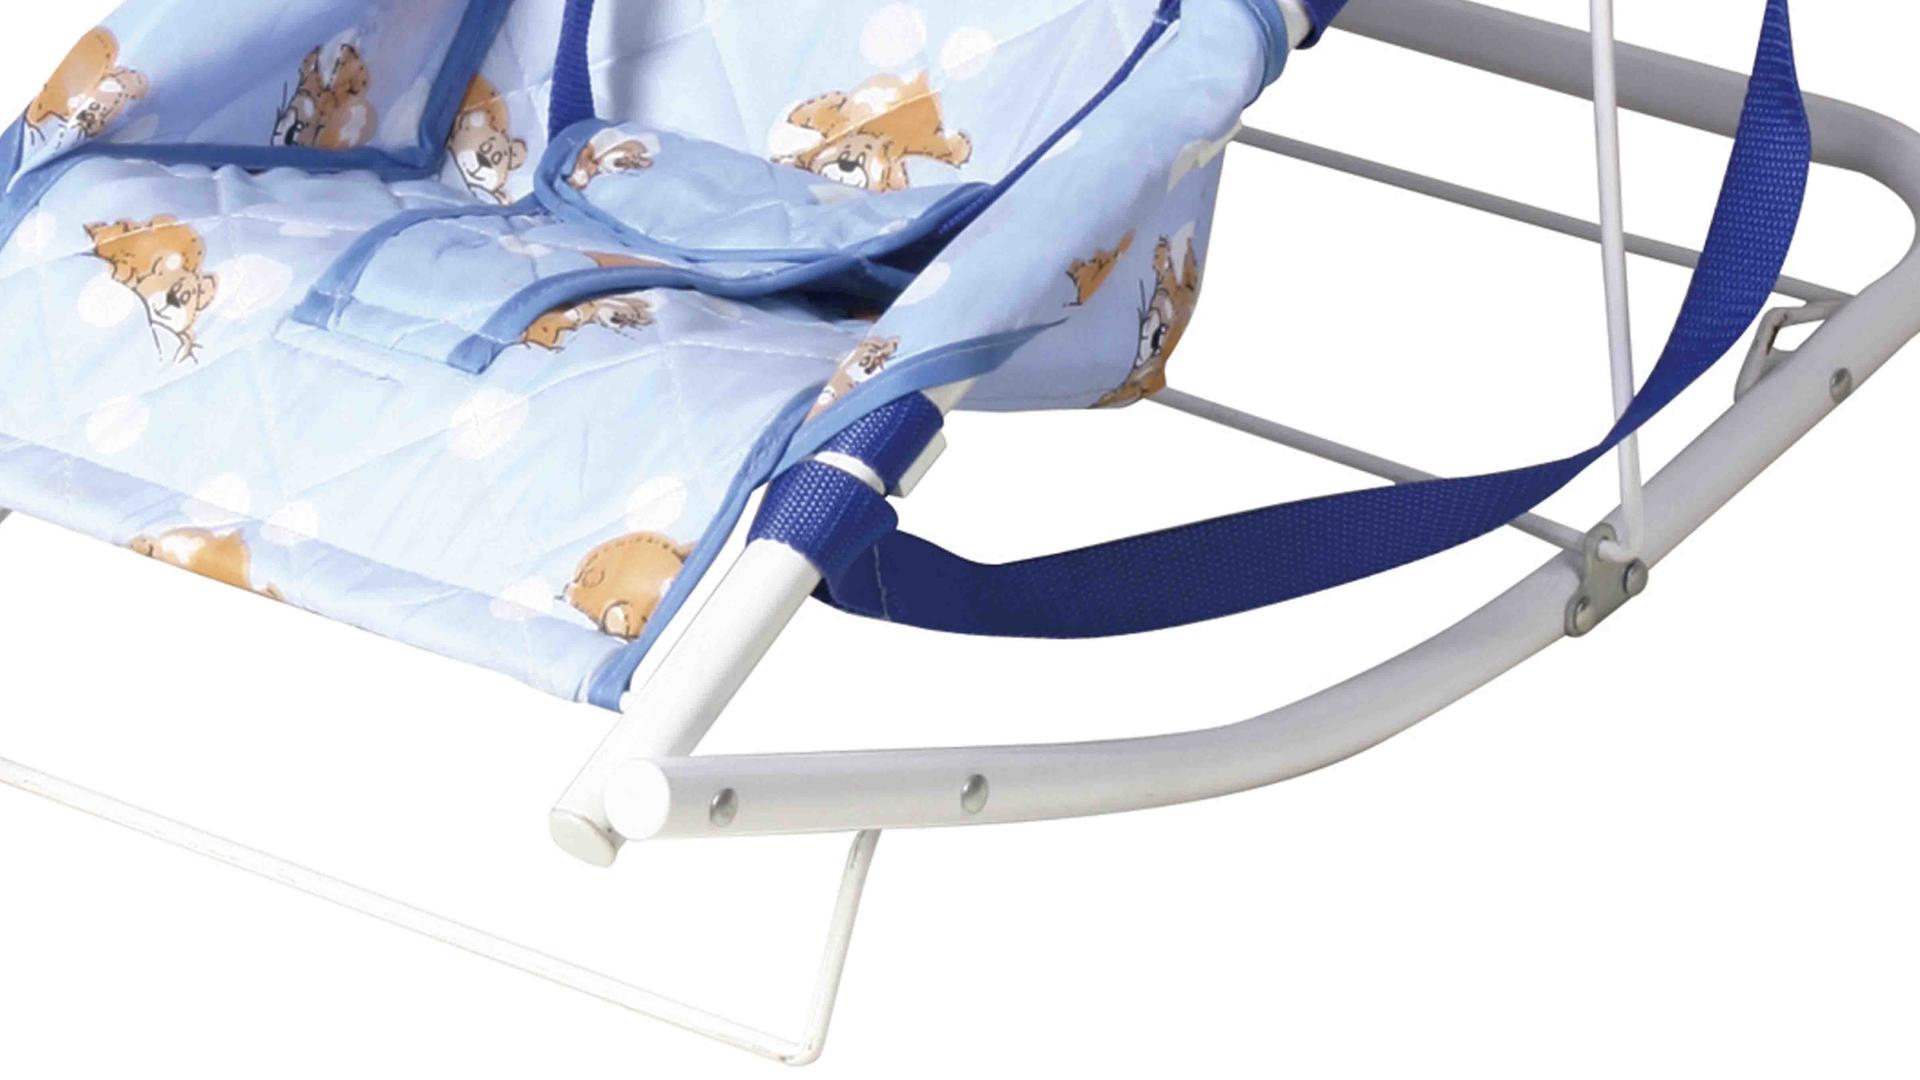 Aoqi baby boy bouncer chair factory price for infant